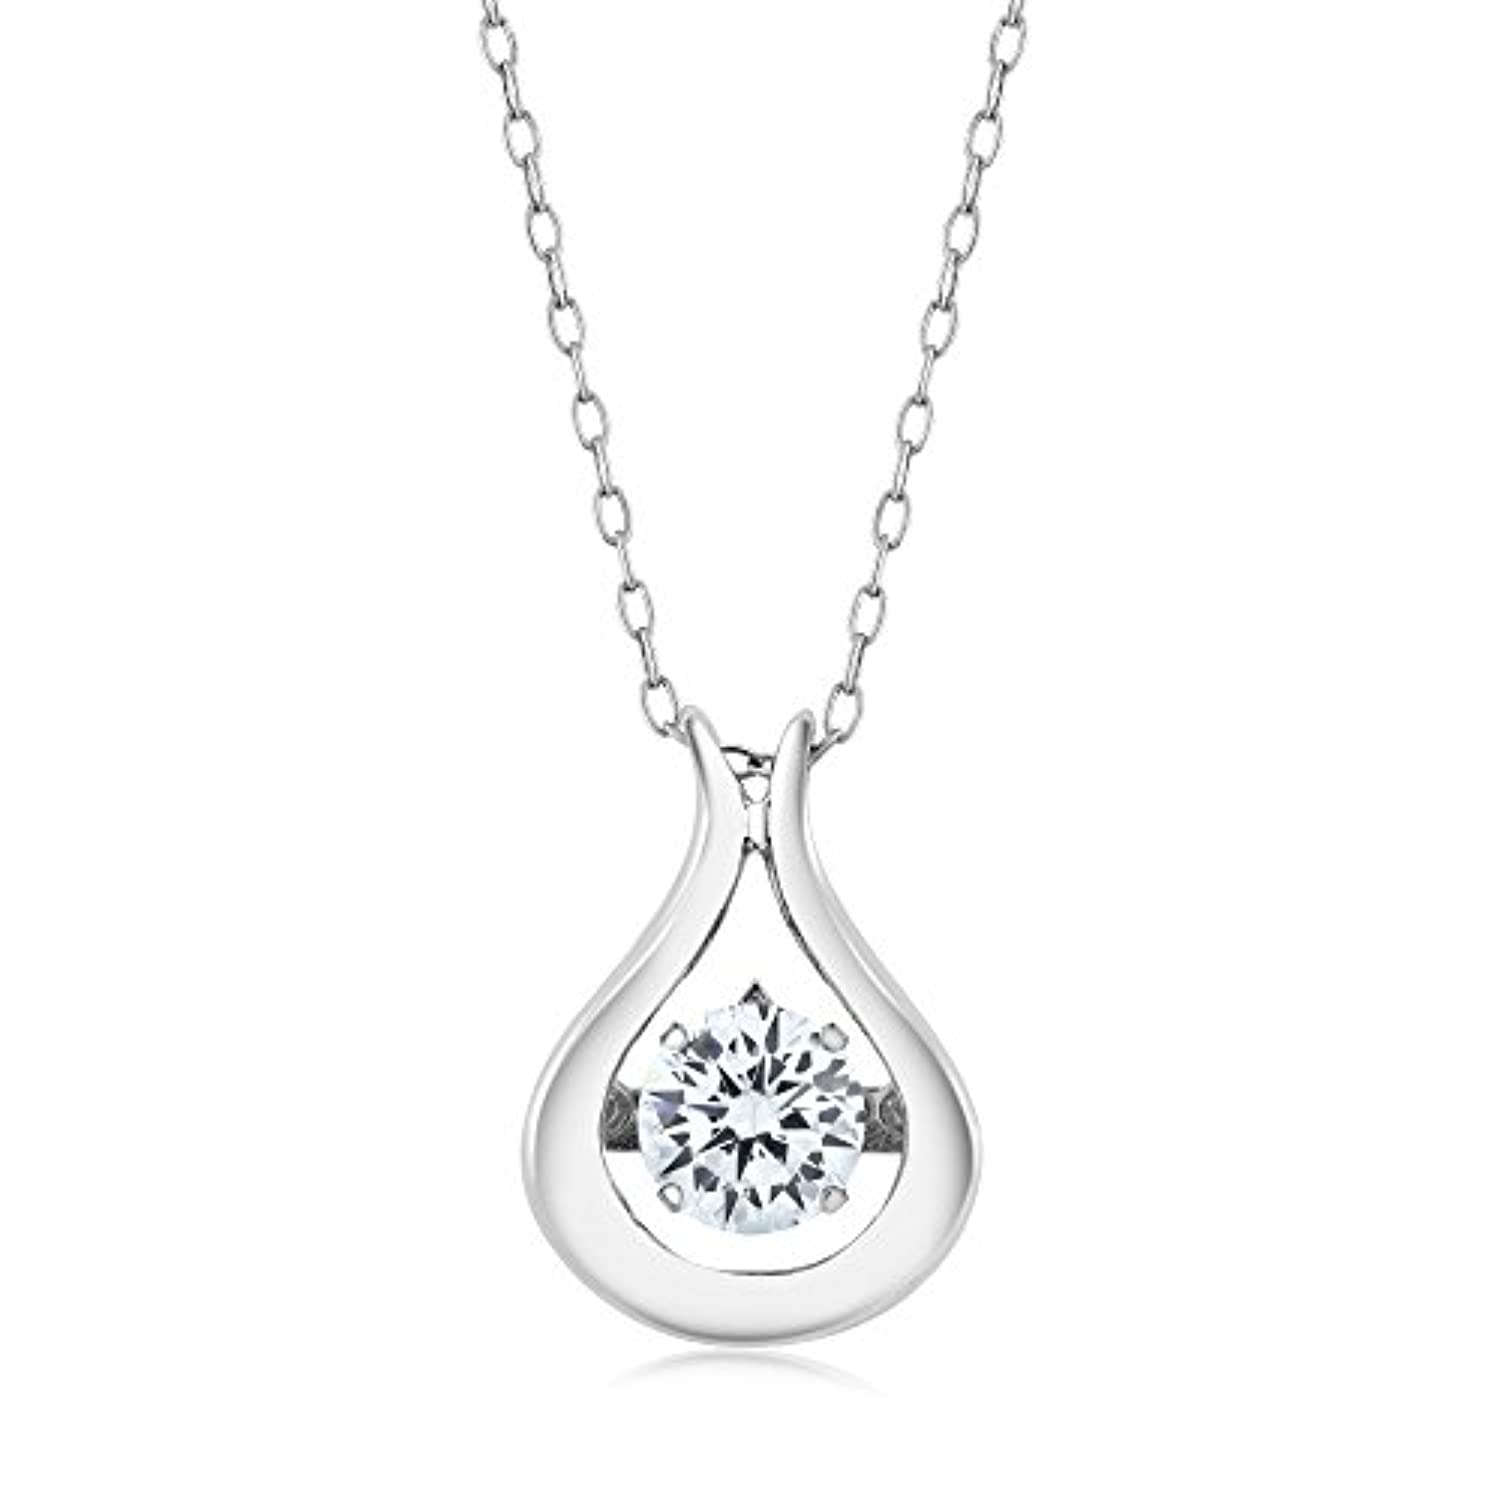 925 Sterling Silver Spinning Dancing Solitaire Pendant Necklace Wedding Gift For Women With 18 Inch Chain Set with Zirconia